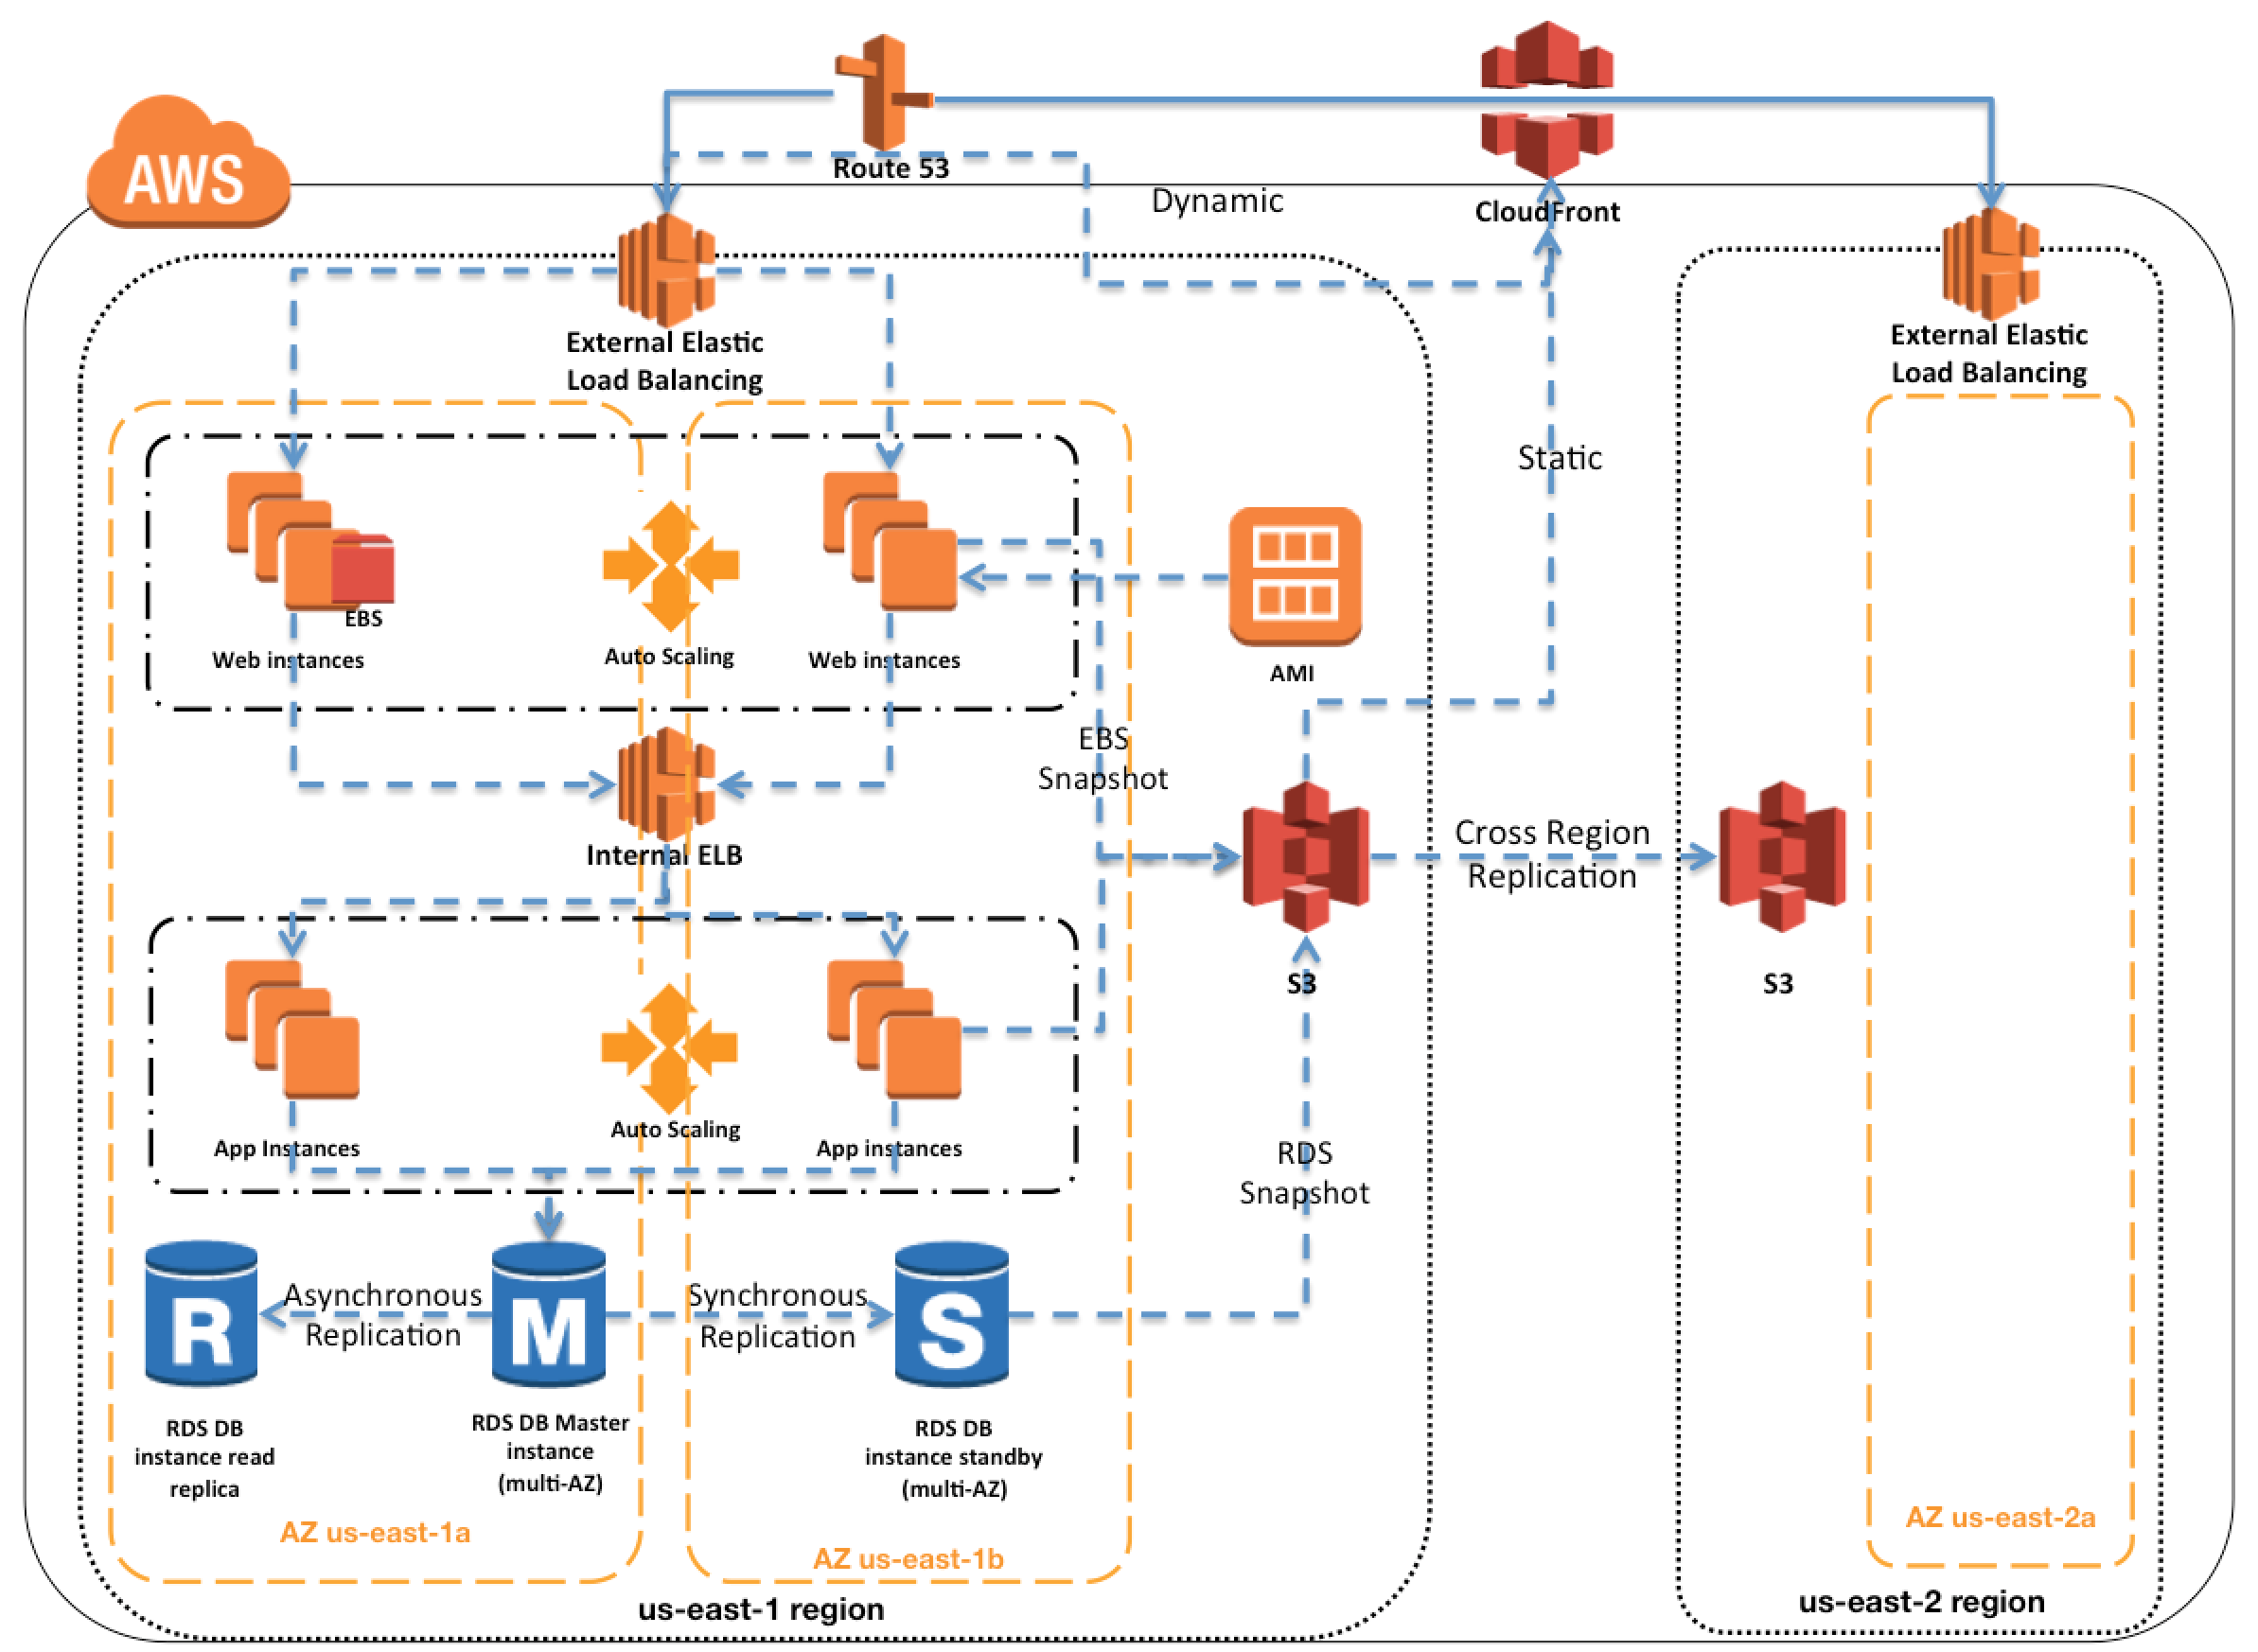 This image shows the various factors that affect the availability of cloud services, including the number of Availability Zones used, the type of Amazon EC2 instances used, and the use of Auto Scaling and Elastic Load Balancing.